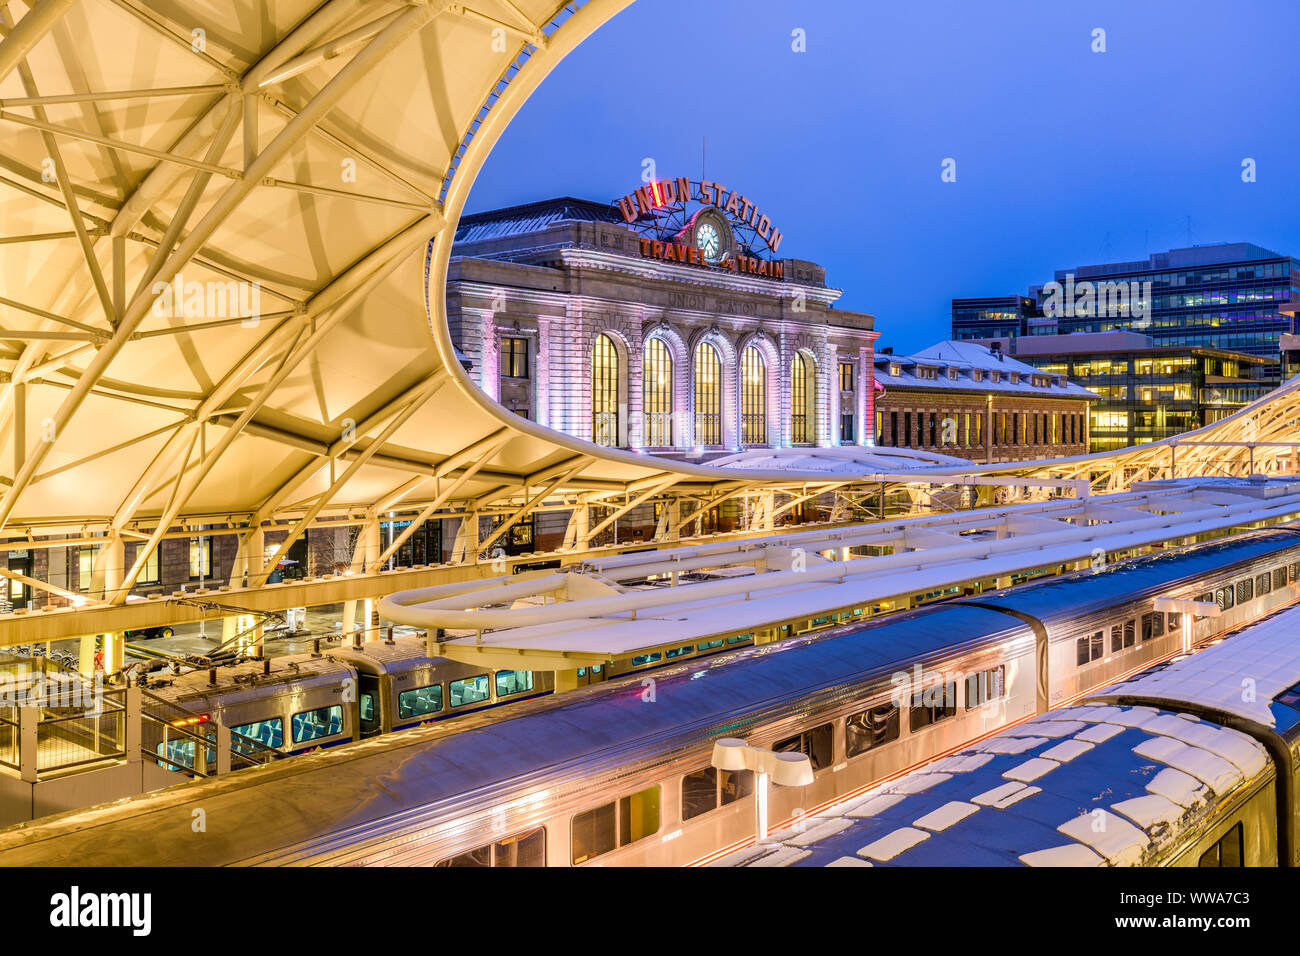 DENVER, COLORADO - MARCH 13, 2019: Trains out of service at Union Station after the 'Bomb Cyclone' winter weather event. The central portion of the st Stock Photo